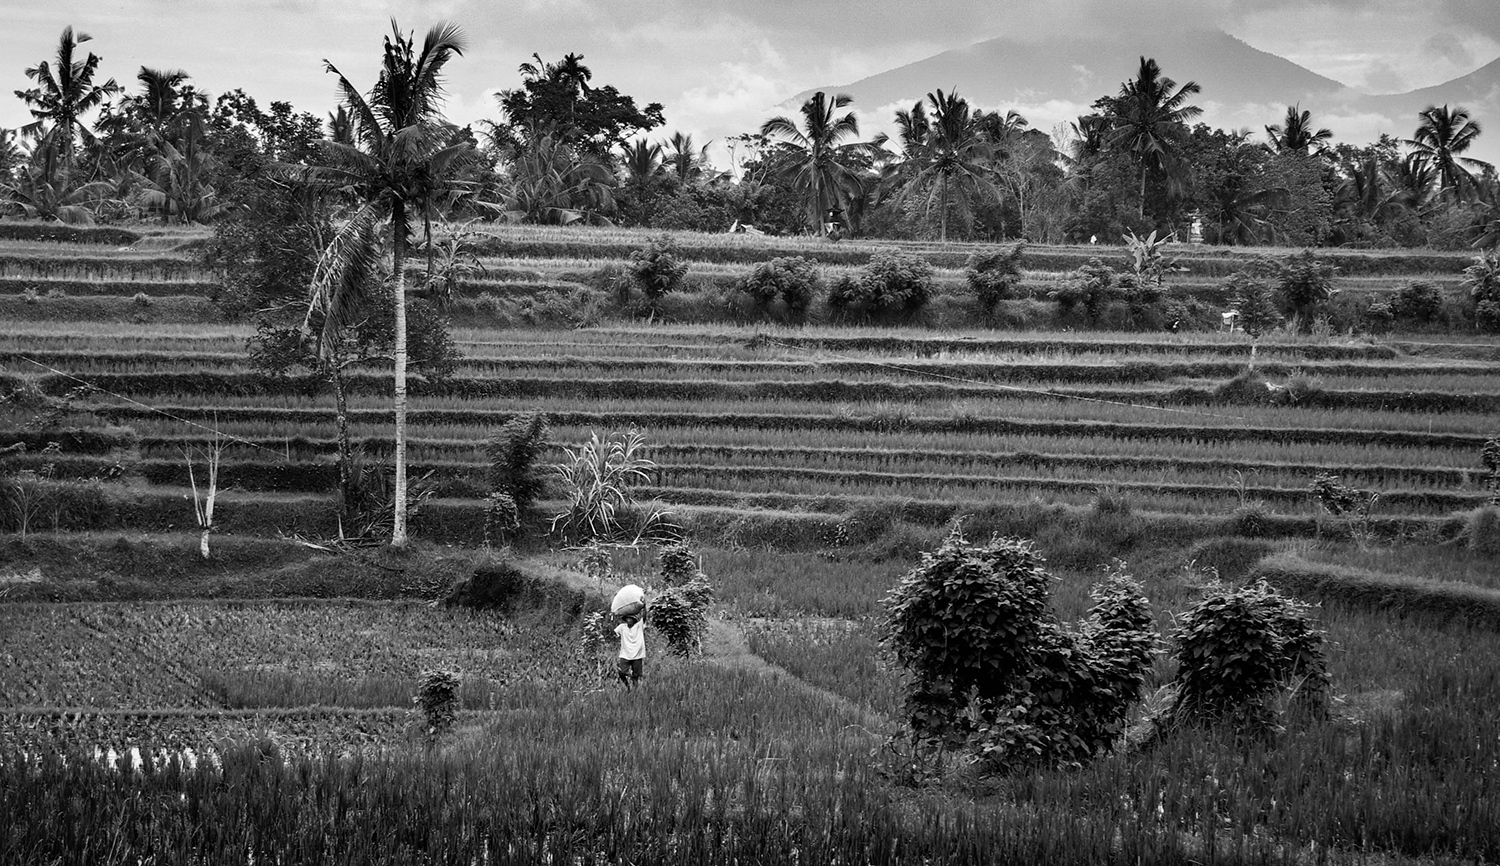 <p>A farmer carries some of his harvest through terraced paddies.</p>